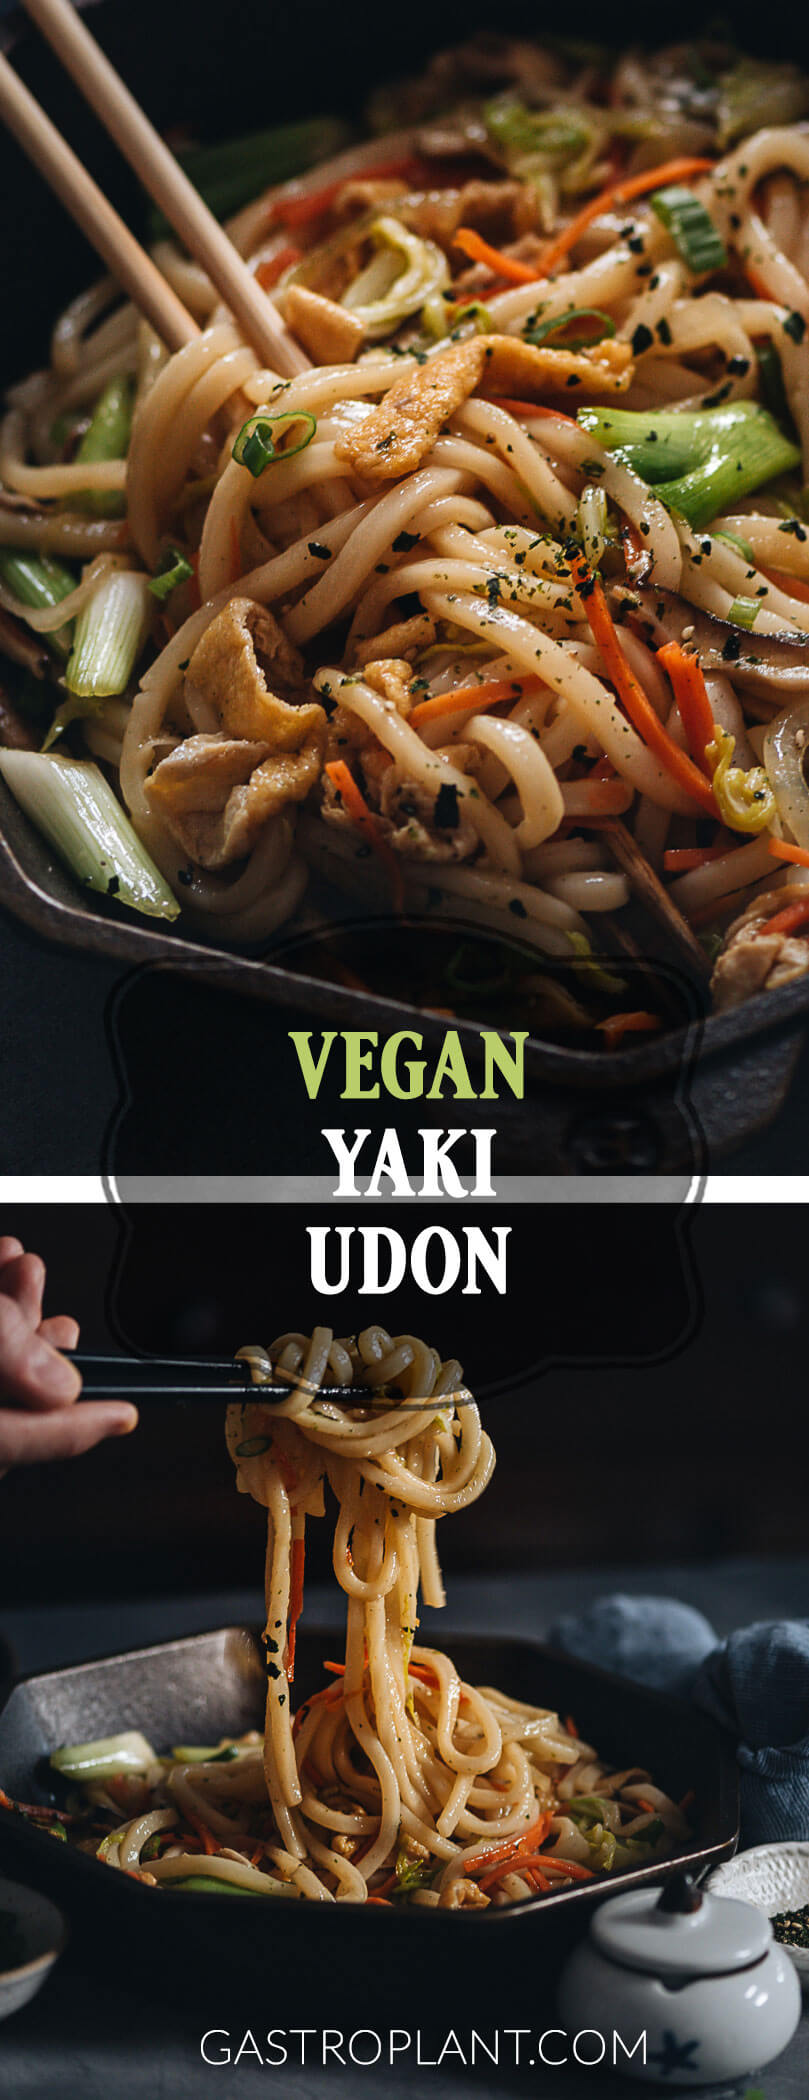 Fast easy delicious plant-based yaki-udon with veggies, mushrooms, and tofu